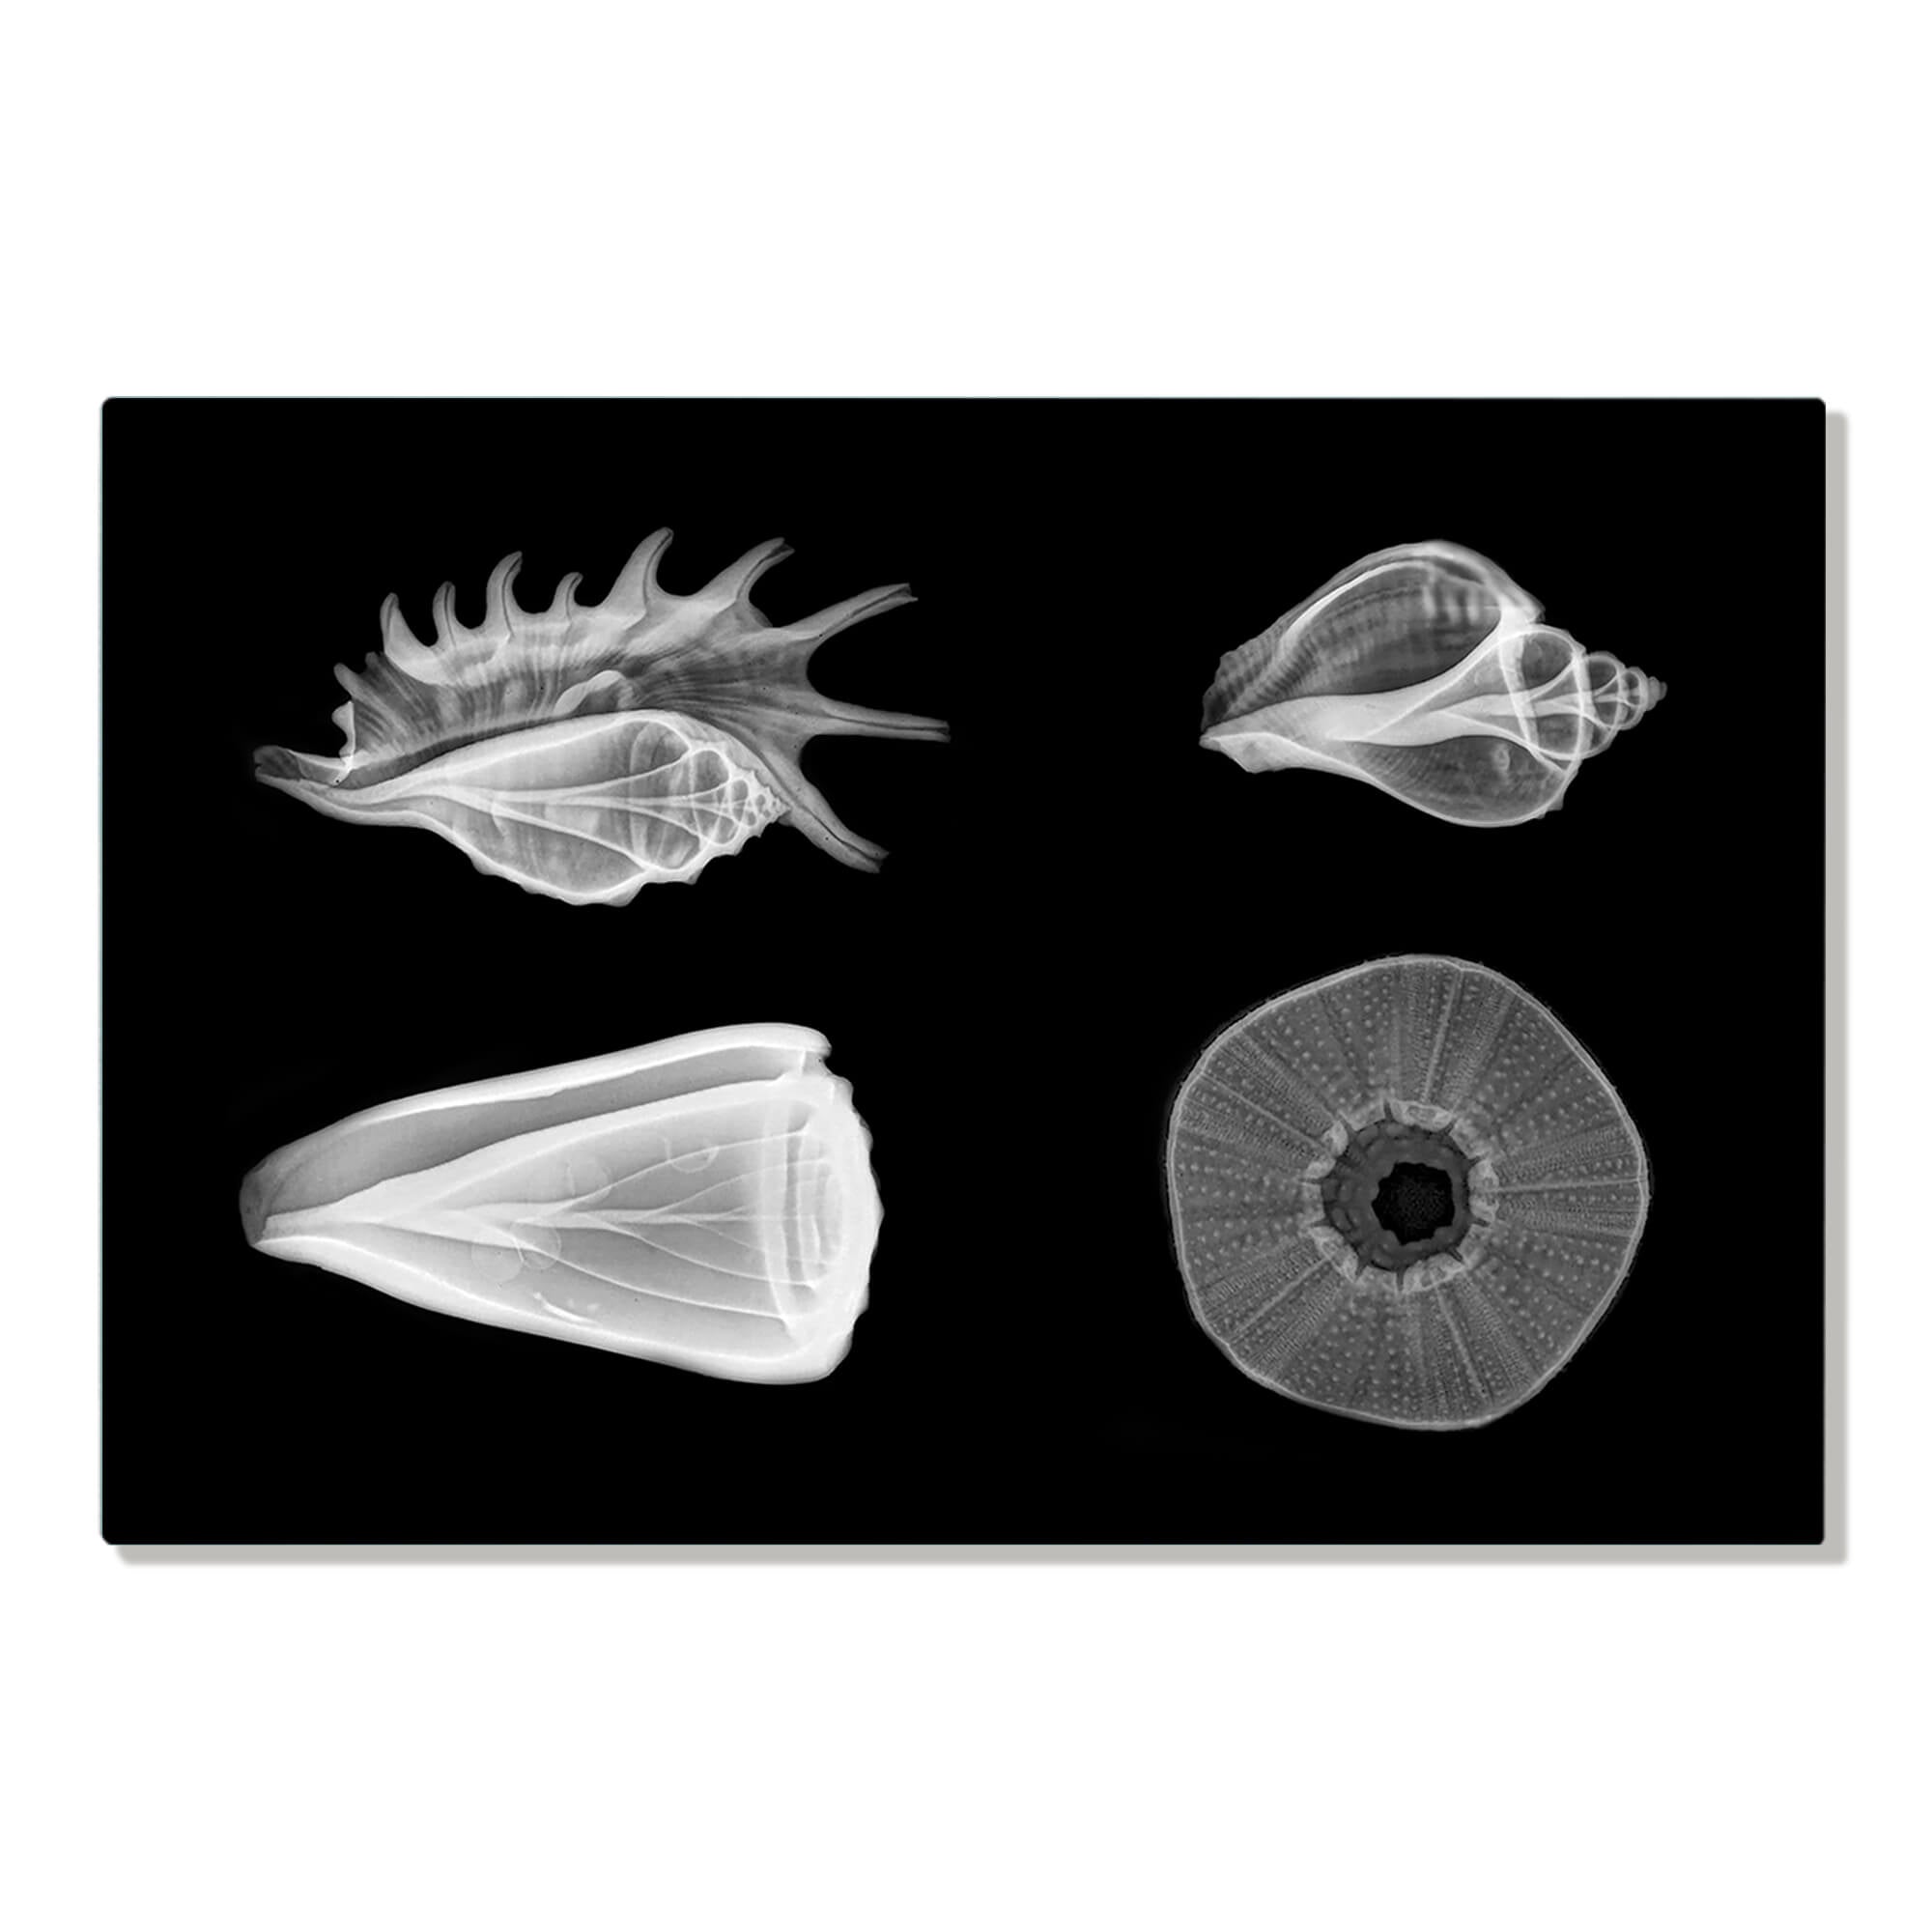 Metal art print of seashells and a sea urchin taken using an X-ray technology by Hawaii artist Michelle Smith